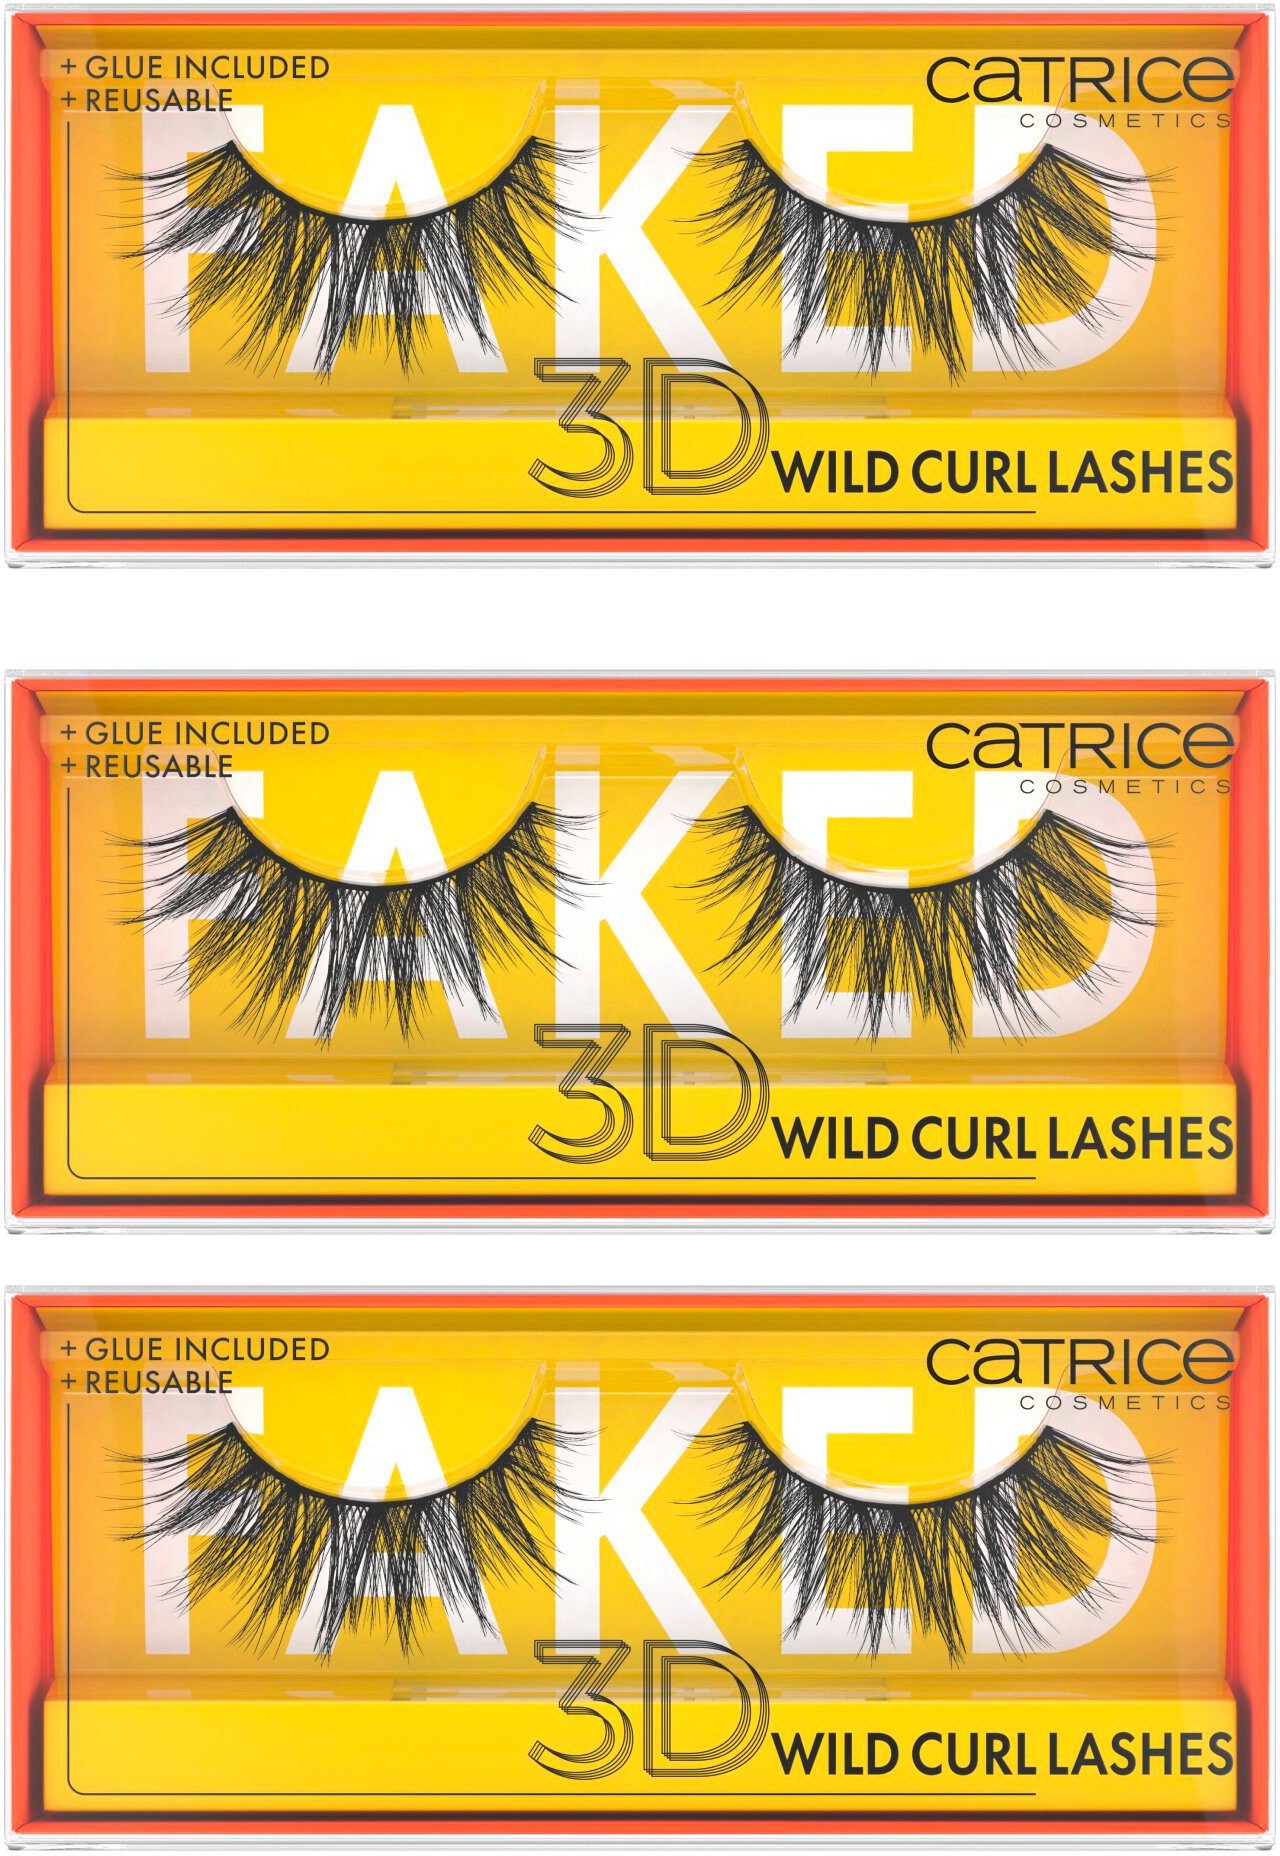 tlg. 3D Curl Catrice 3 Lashes, Bandwimpern Set, Faked Wild